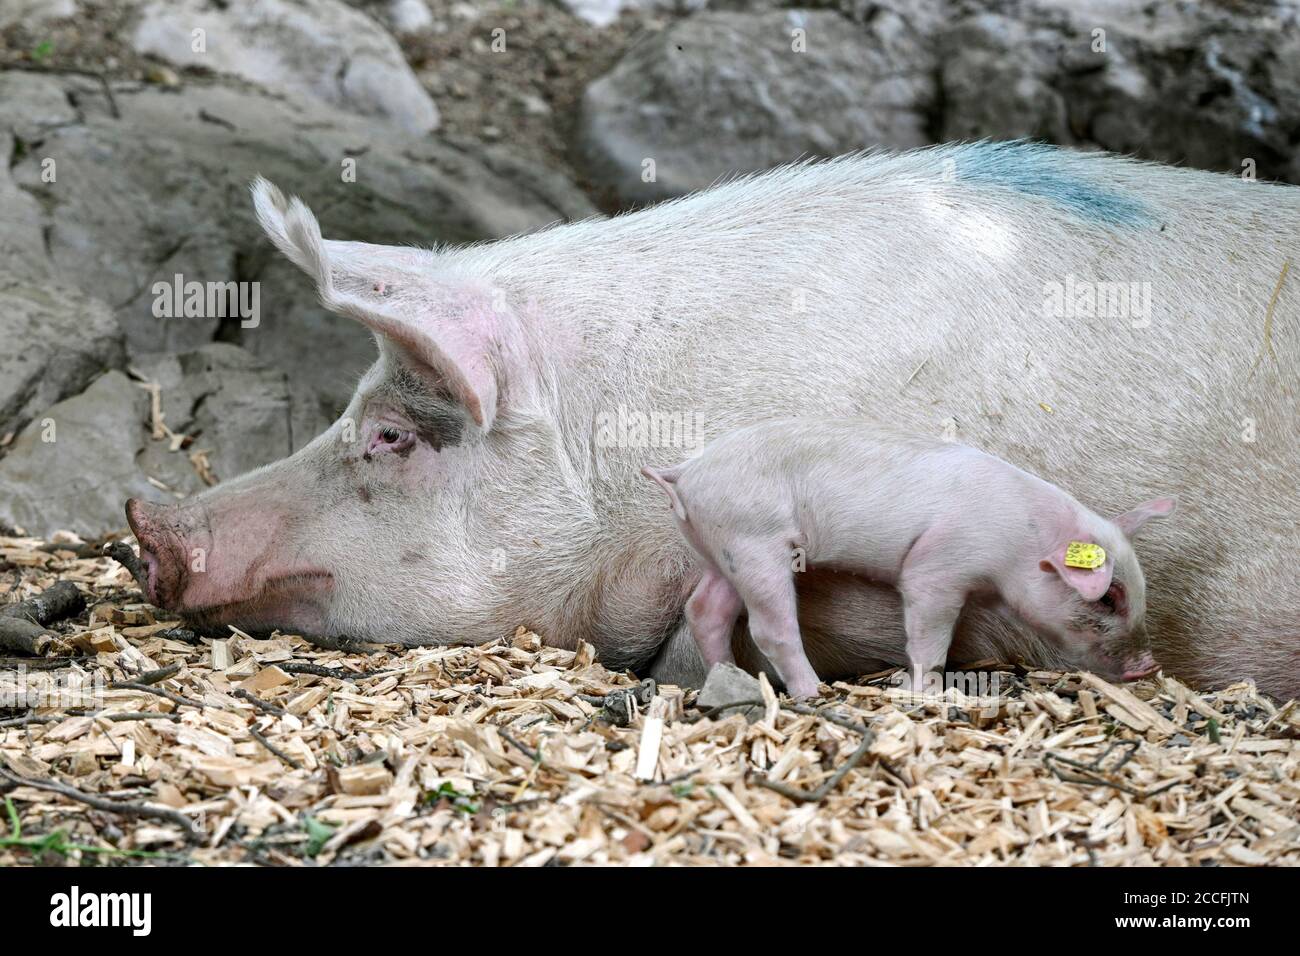 Sow with piglet Stock Photo